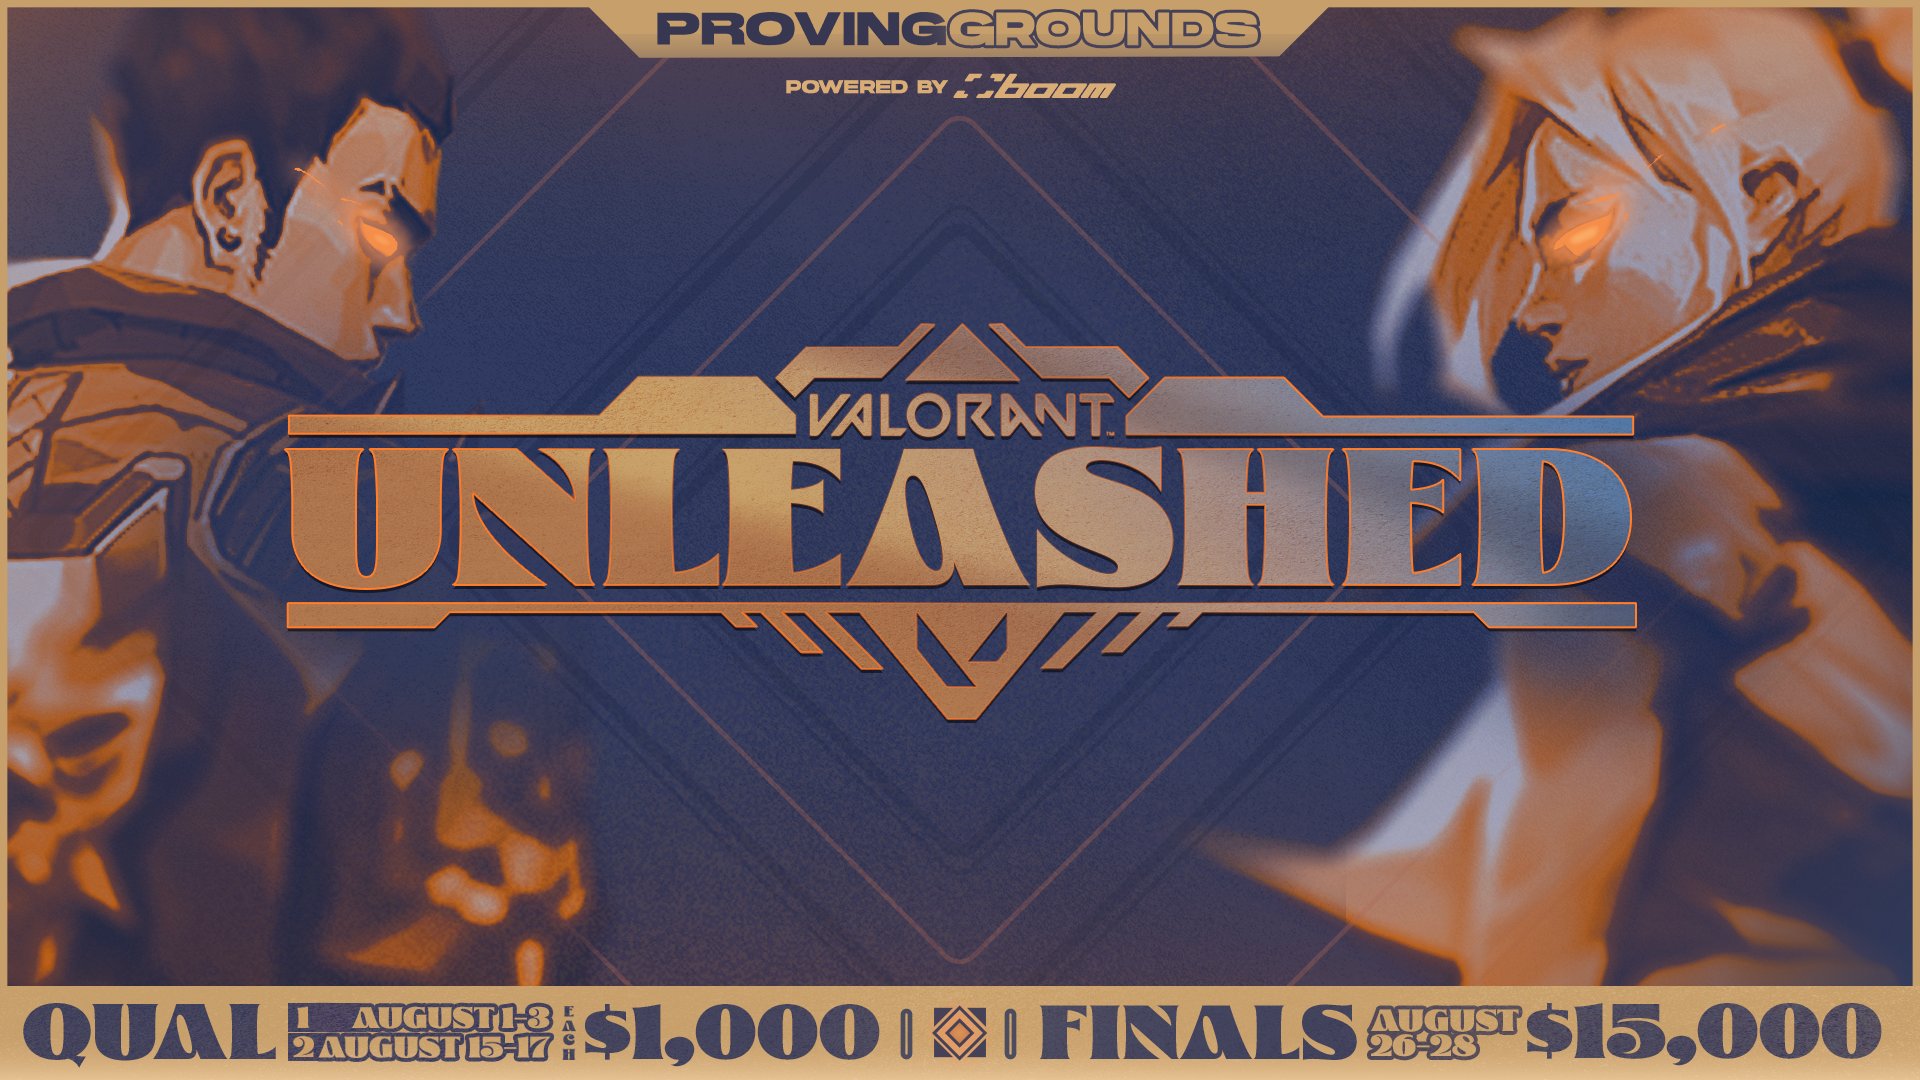 Introducing: Valorant UNLEASHED!